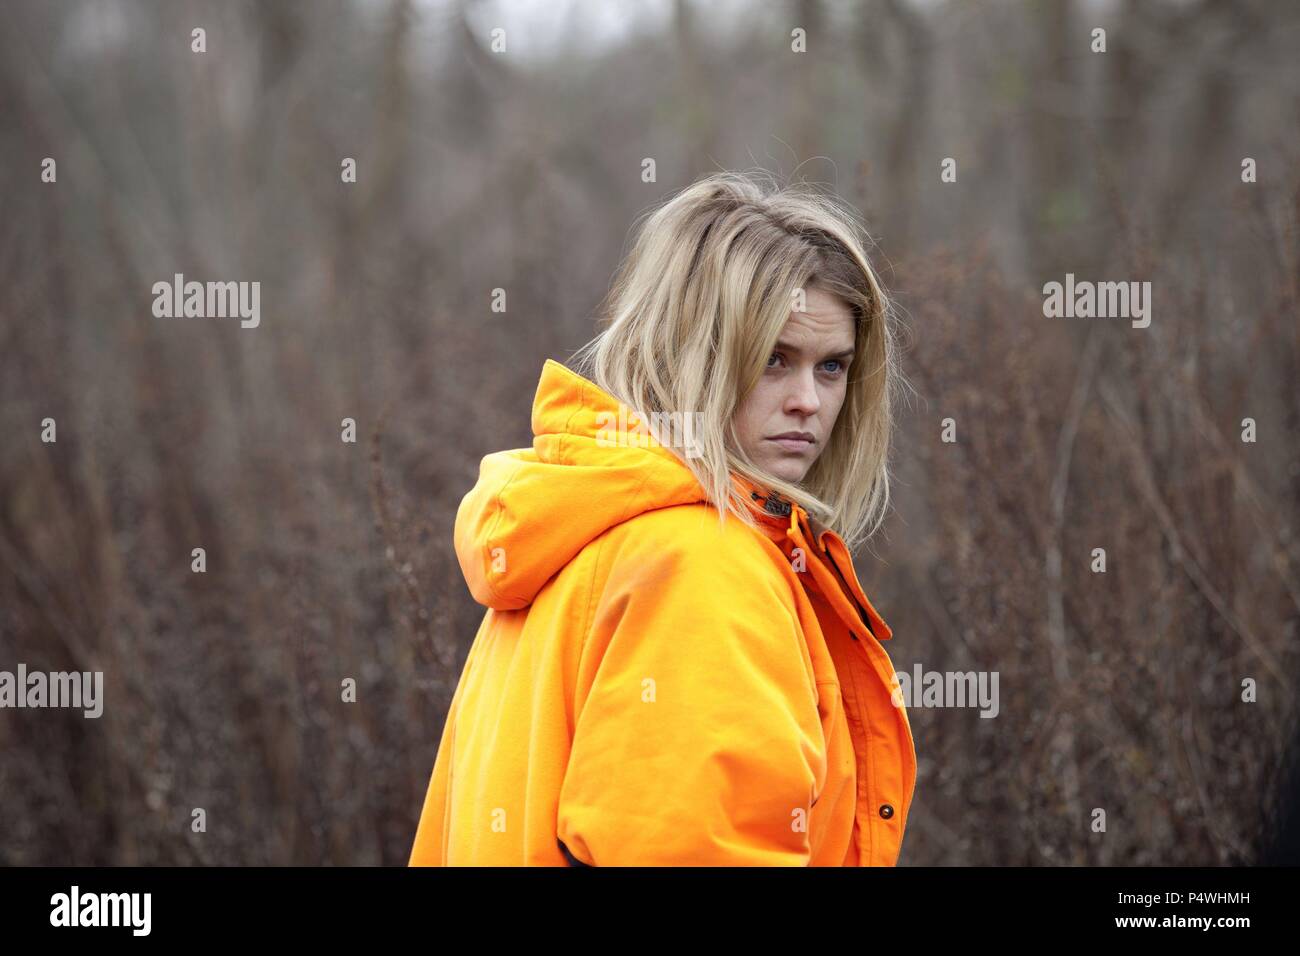 Original Film Title: COLD COMES THE NIGHT.  English Title: COLD COMES THE NIGHT.  Film Director: TZE CHUN.  Year: 2013.  Stars: ALICE EVE. Credit: SYNCOPATED FILMS / Album Stock Photo